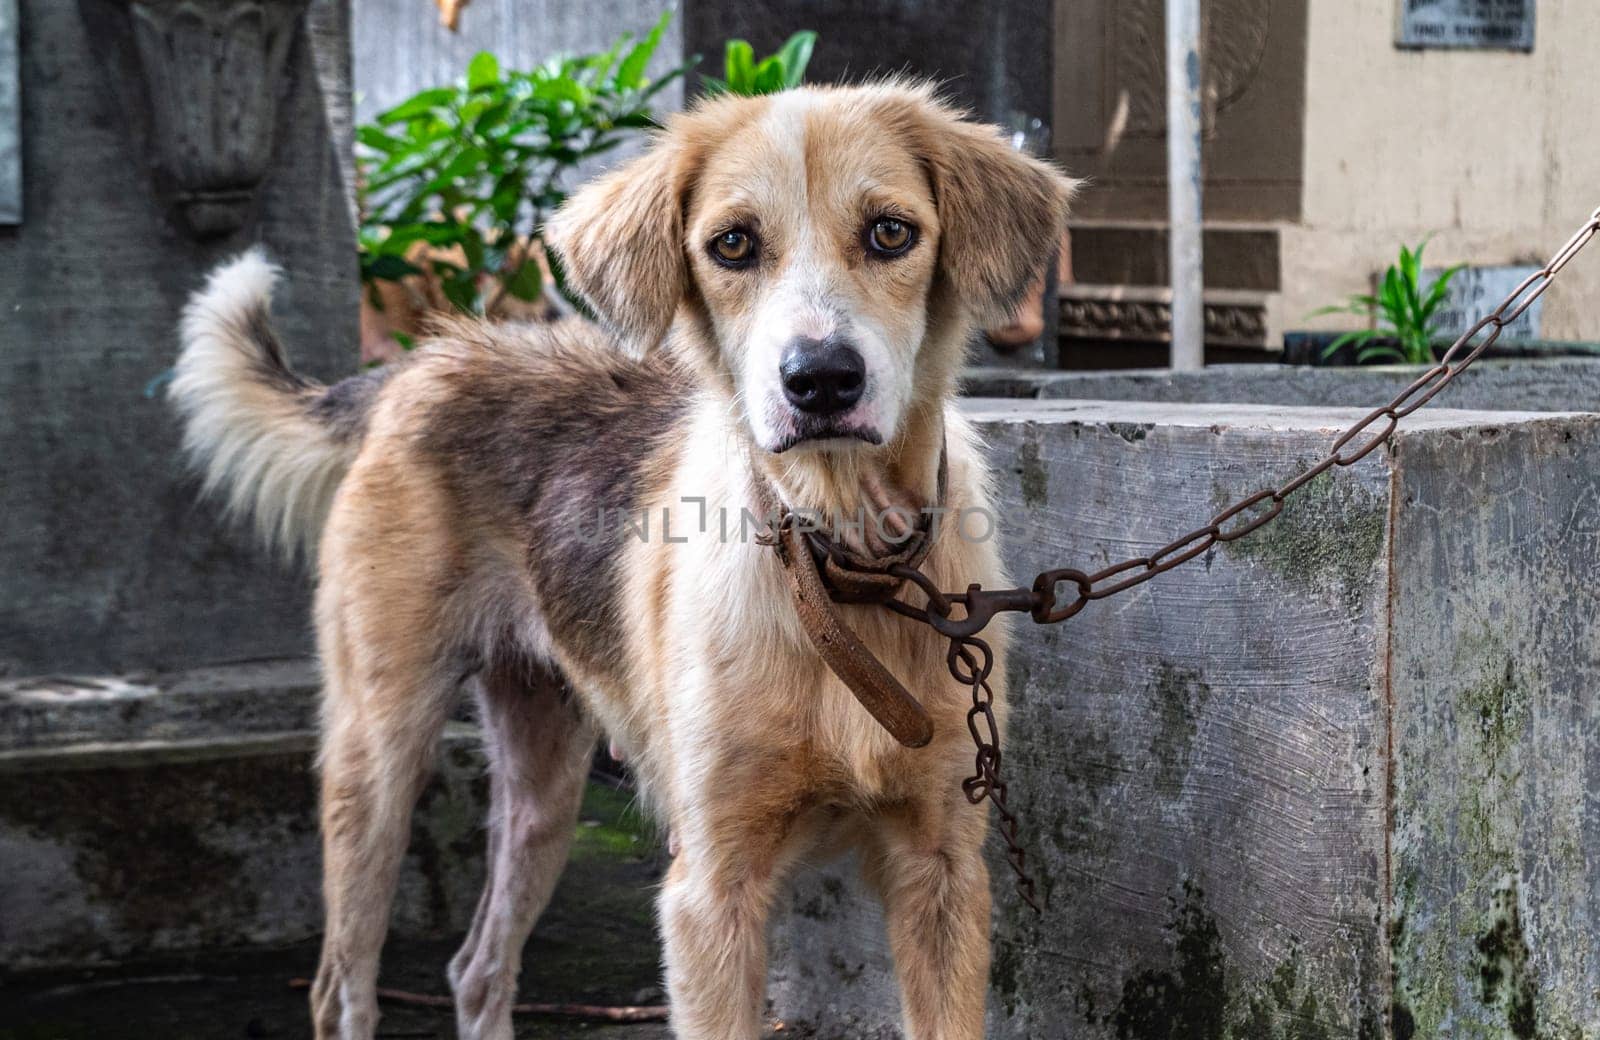 Scruffy dog on a chain in a rustic outdoor setting during daytime